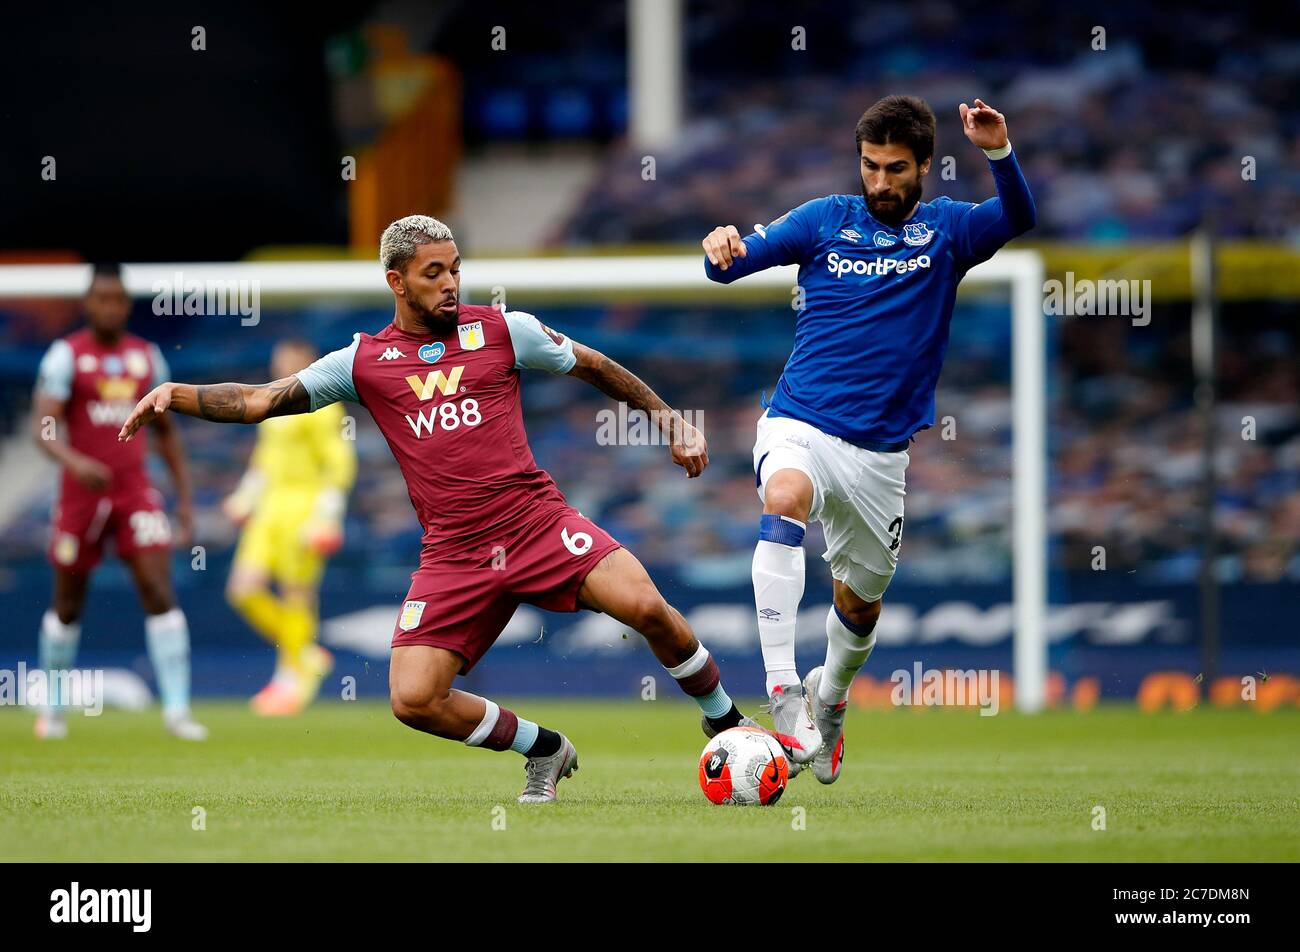 Everton’s Andre Gomes (right) and Aston Villa's Douglas Luiz battle for the ball during the Premier League match at Goodison Park, Liverpool. Stock Photo